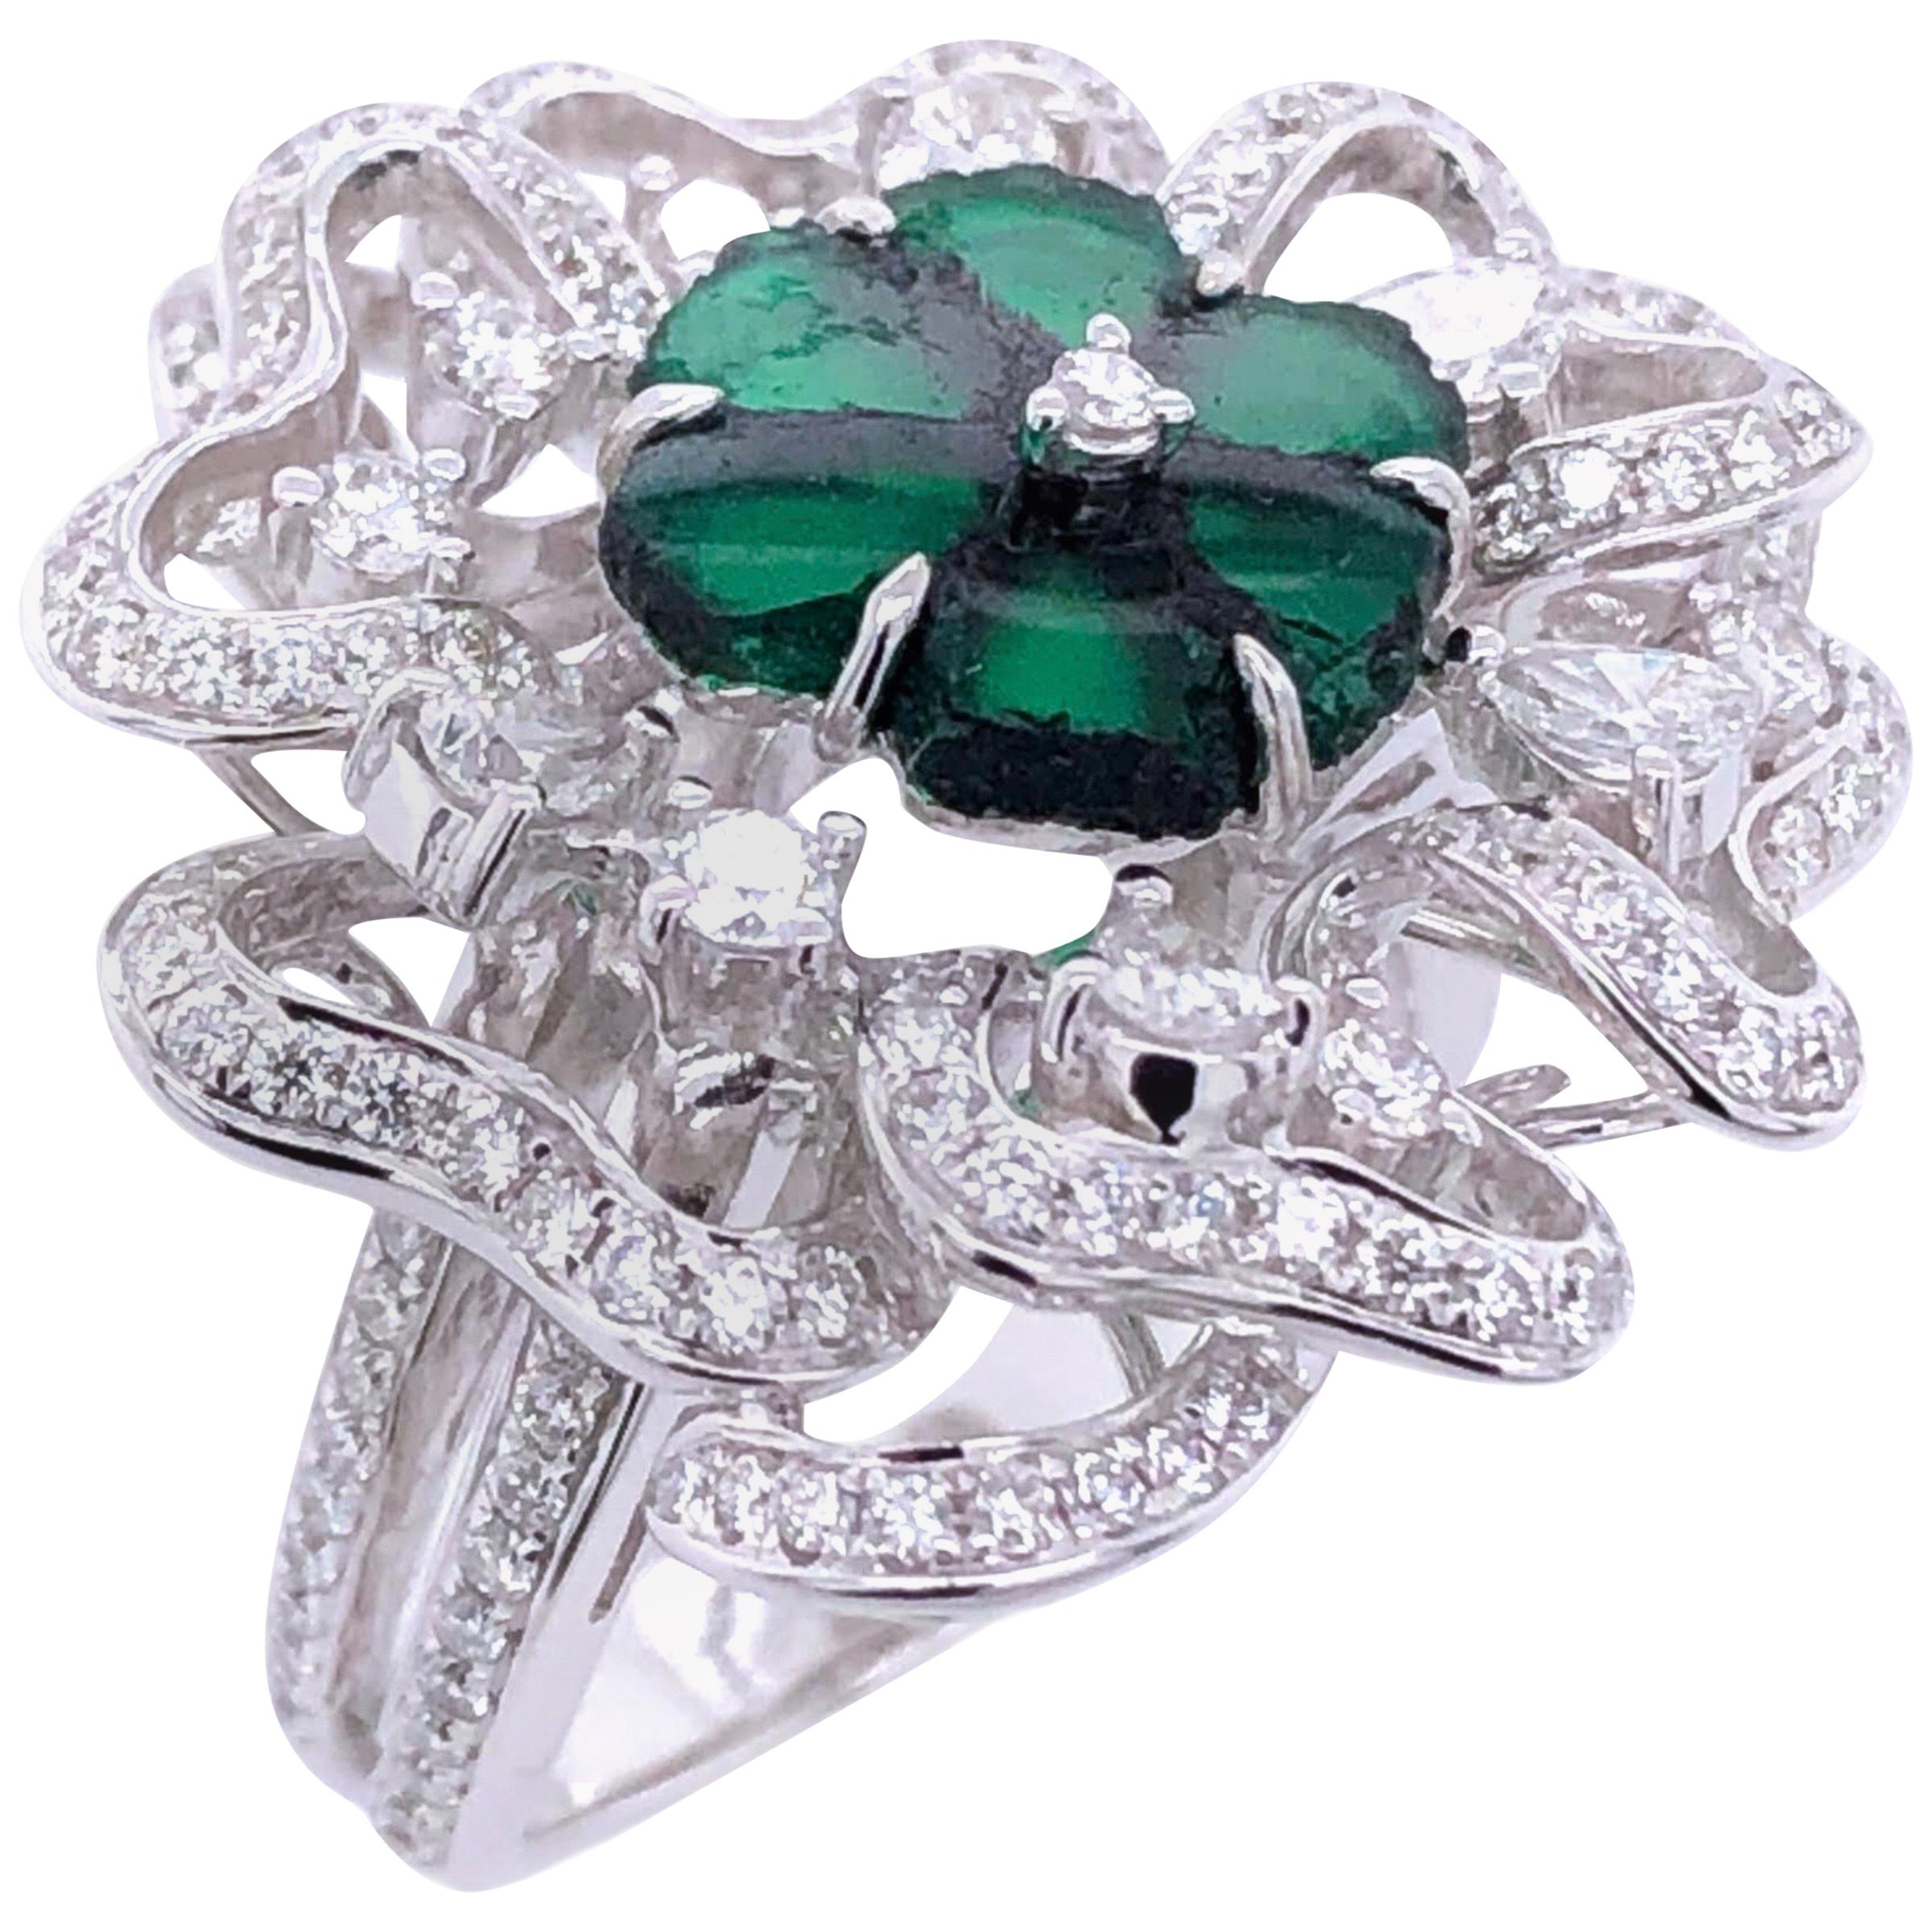 Paris Craft House 1.87ct Rough-Cut Emerald Diamond Flower Cocktail Ring in Gold For Sale